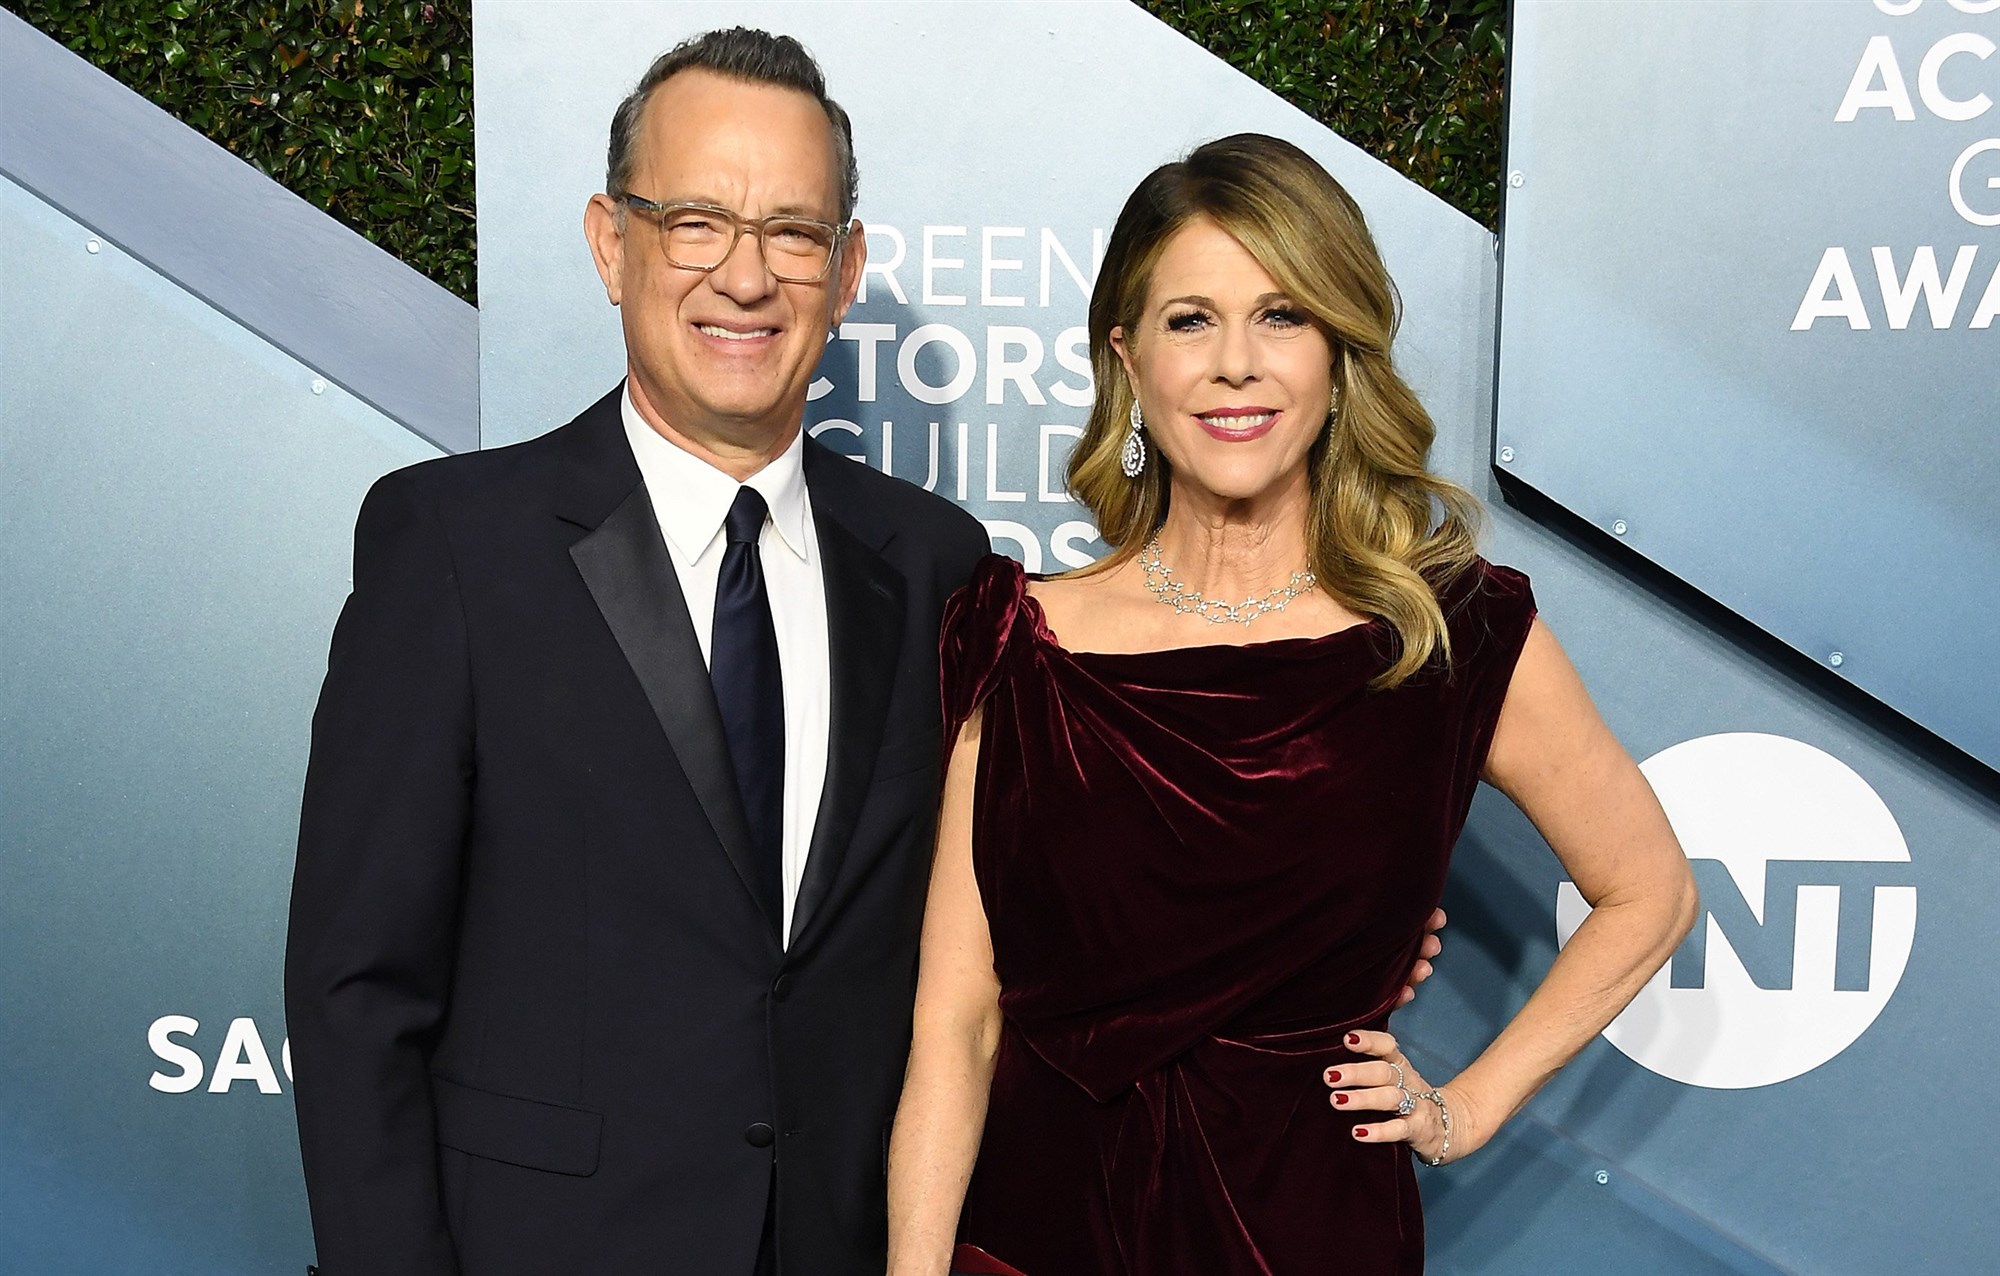 tom-hanks-and-rita-wilson-return-to-the-usa-after-recovering-from-coronavirus